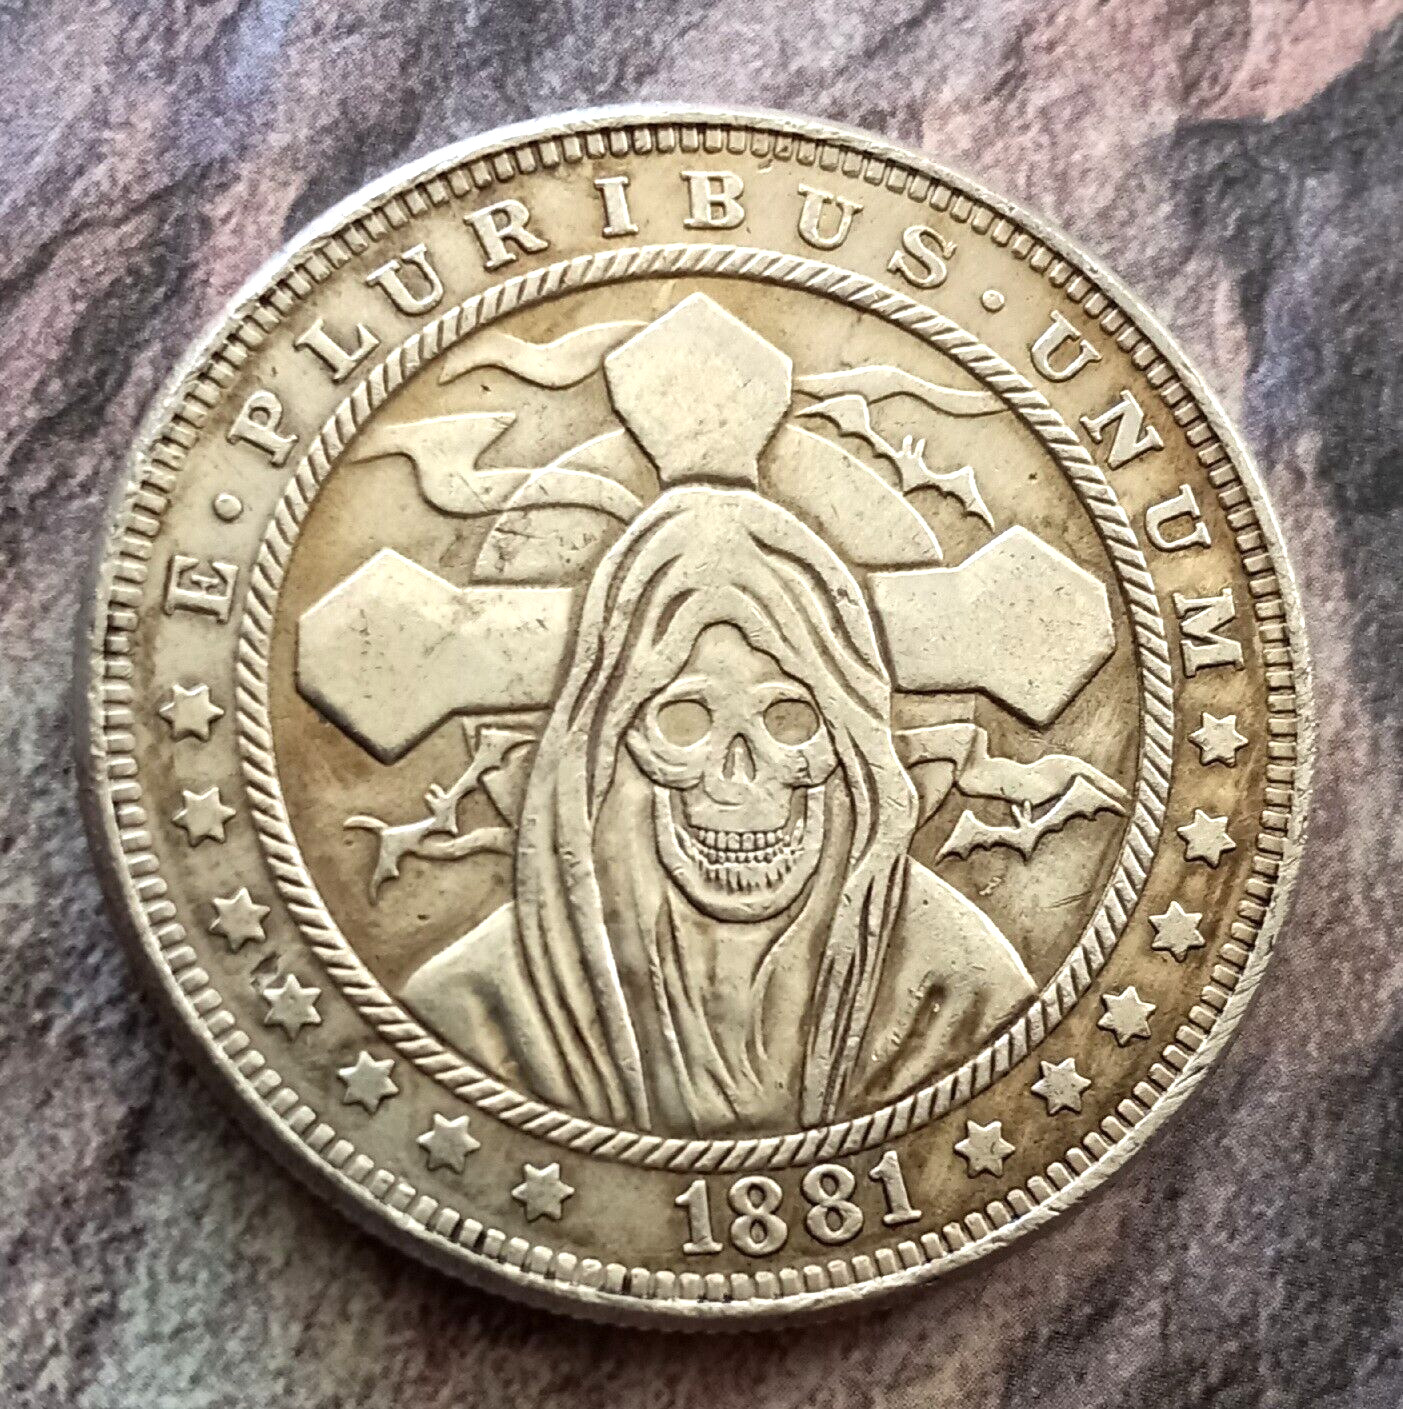 Creepy Demon with Cross Occult  Coin  Dollar Token  Nice Details Witchcraft Bats